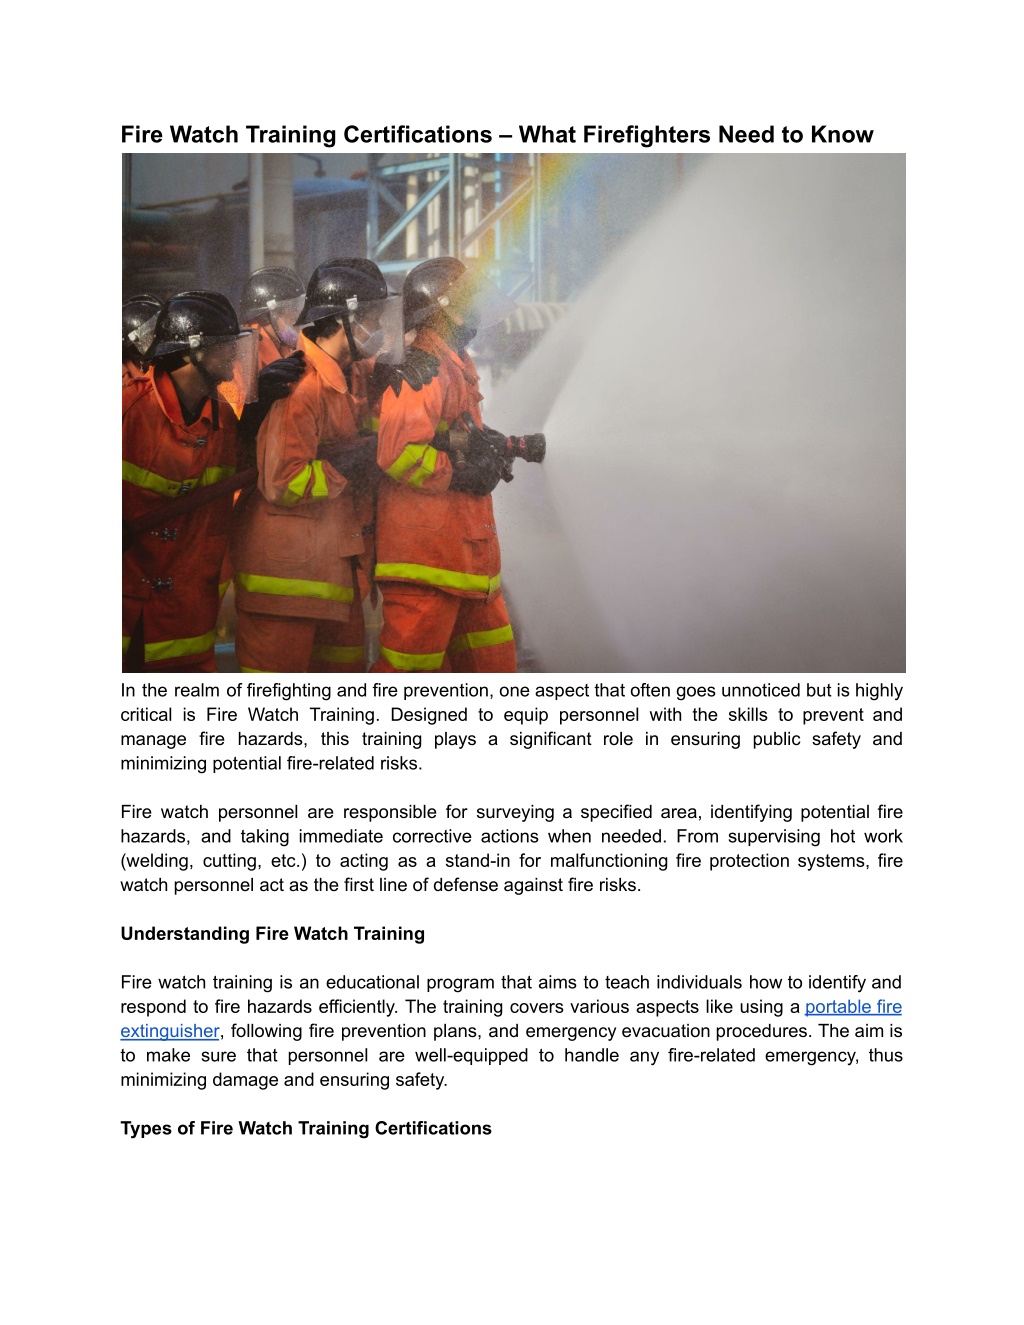 PPT - Fire Watch Training Certifications – What Firefighters Need to ...